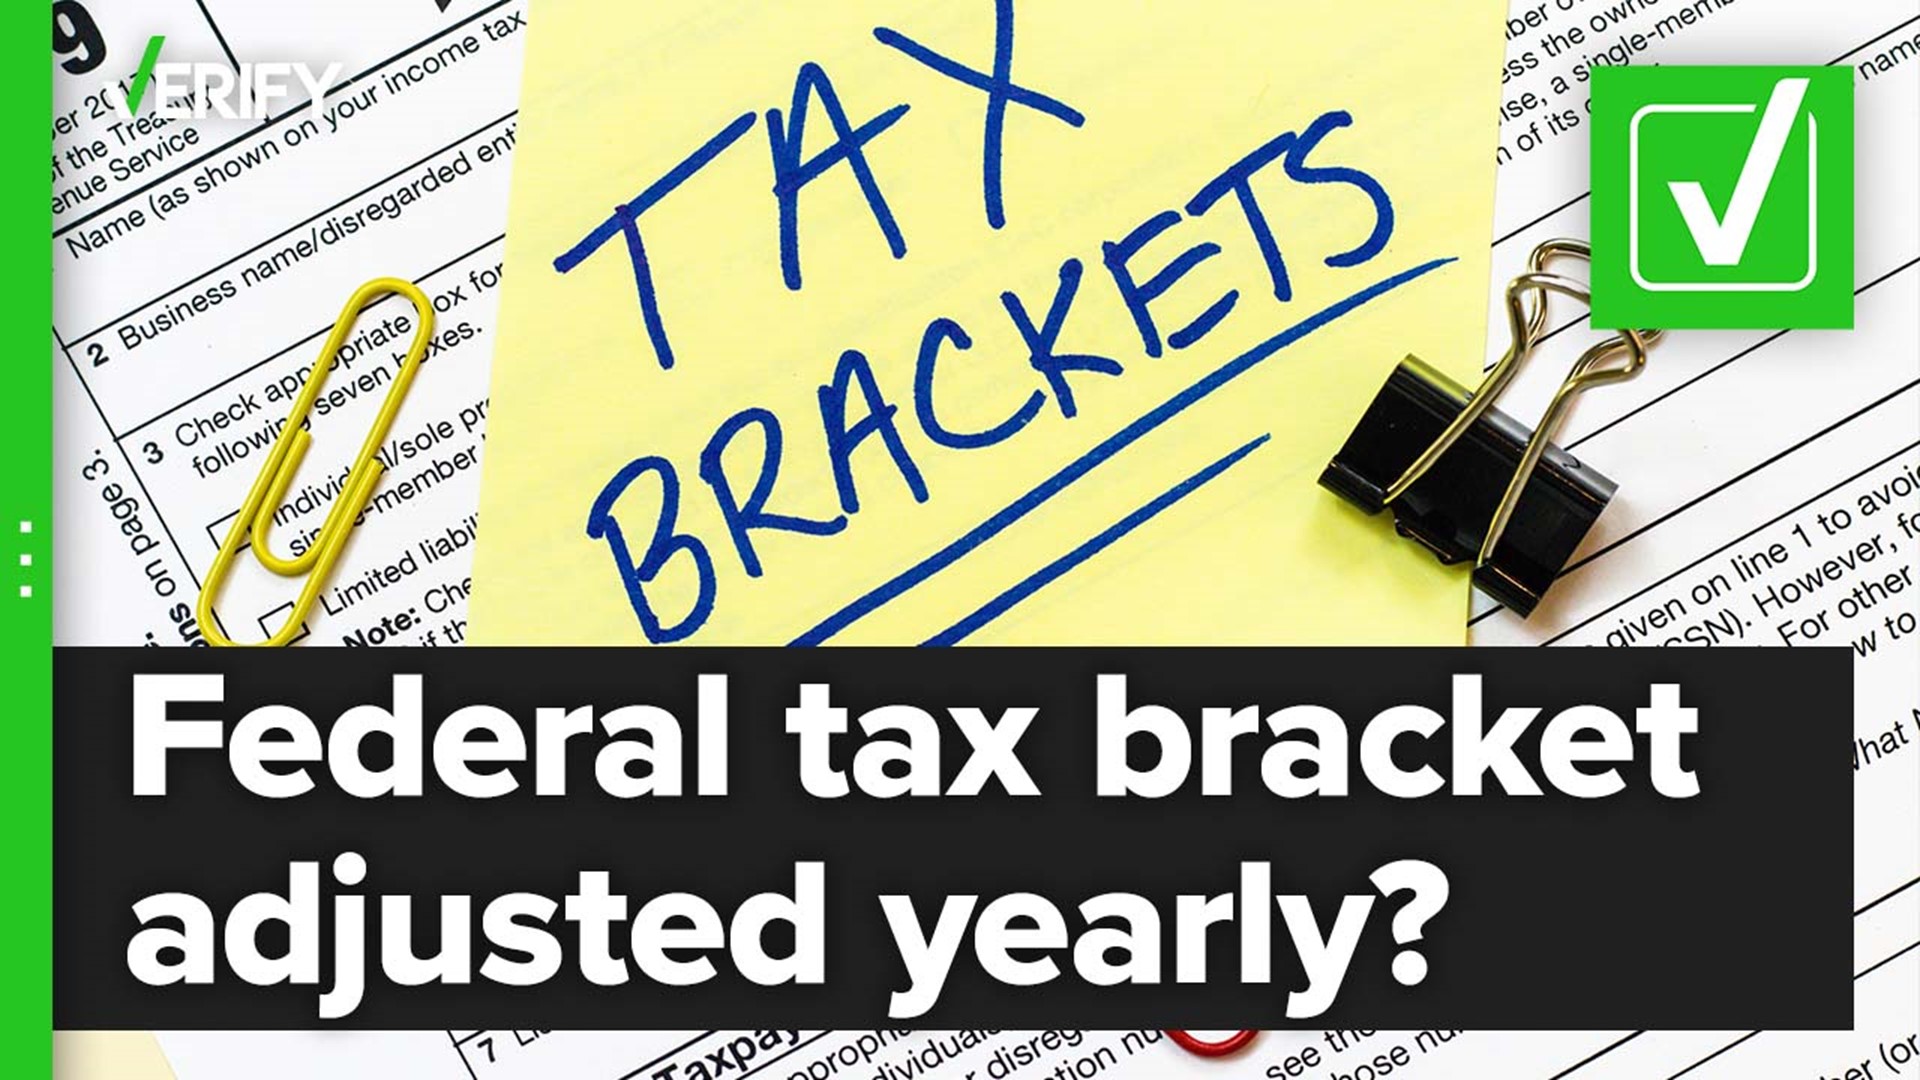 The IRS adjusts federal income tax brackets every year.